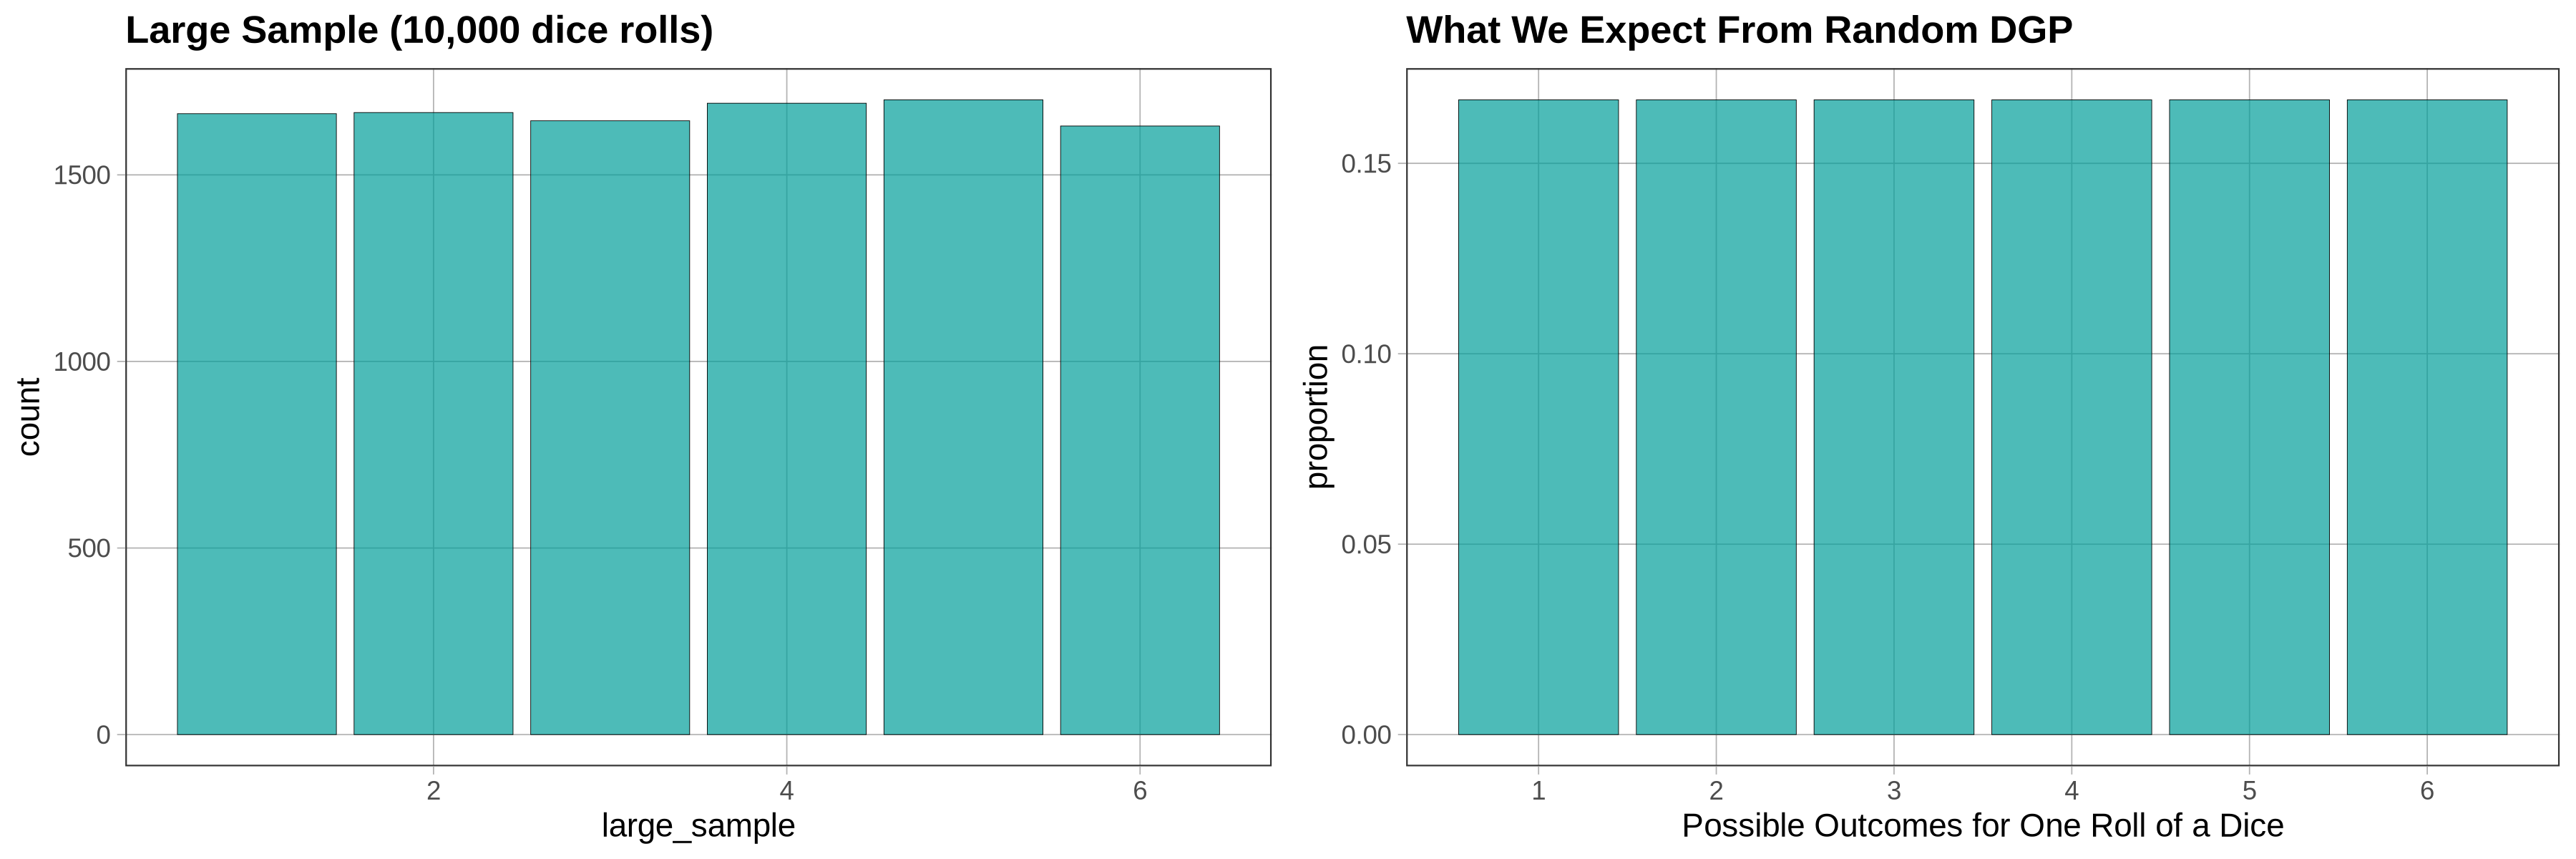 A bar graph of the distribution of a simulated random sample of 10,000 die rolls next to our expectations from a random DGP. Both distributions are uniform.